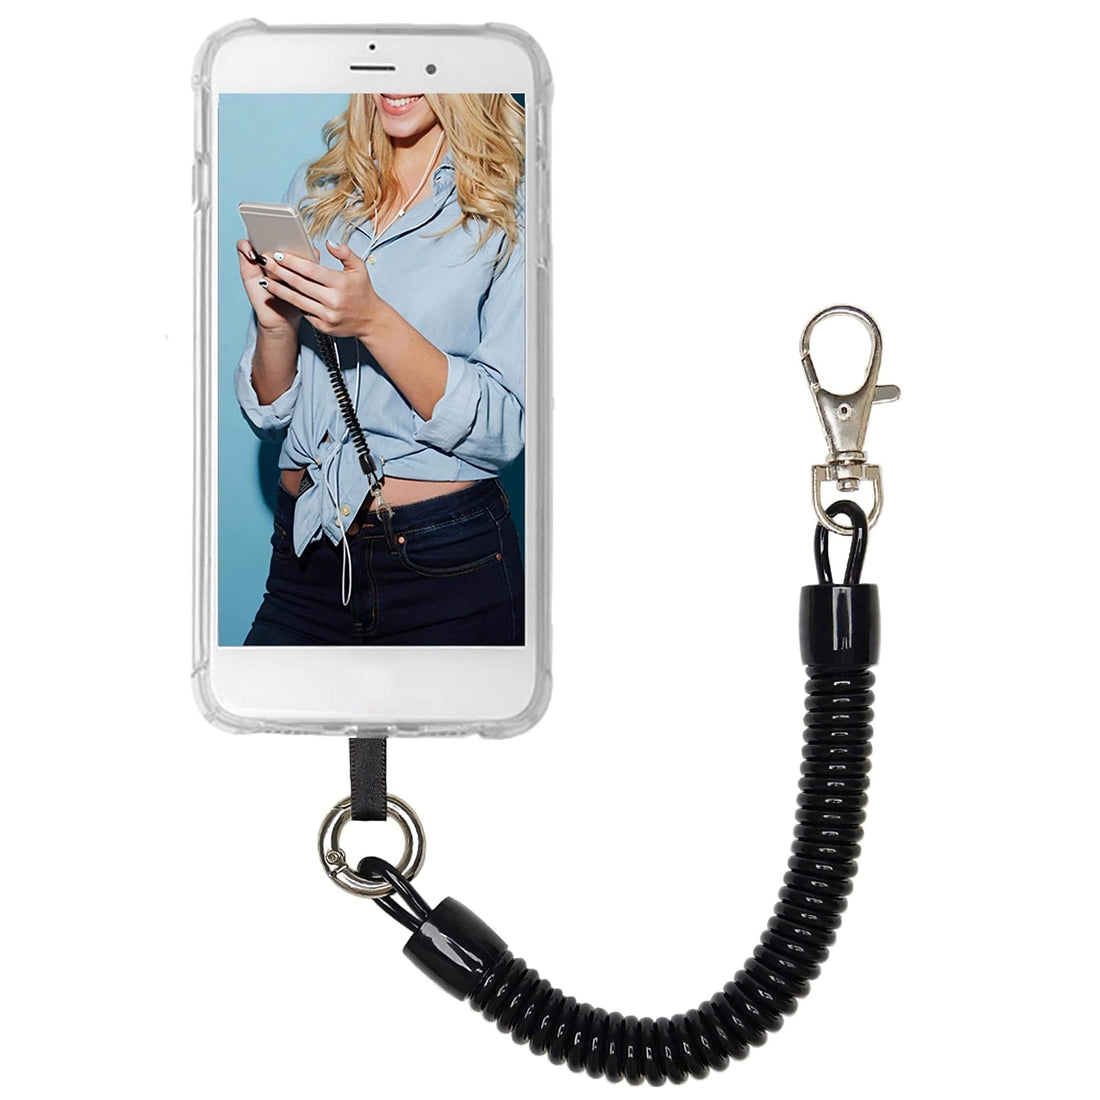 Rave-Essentials Co. Sling Anti-Theft Phone Tether